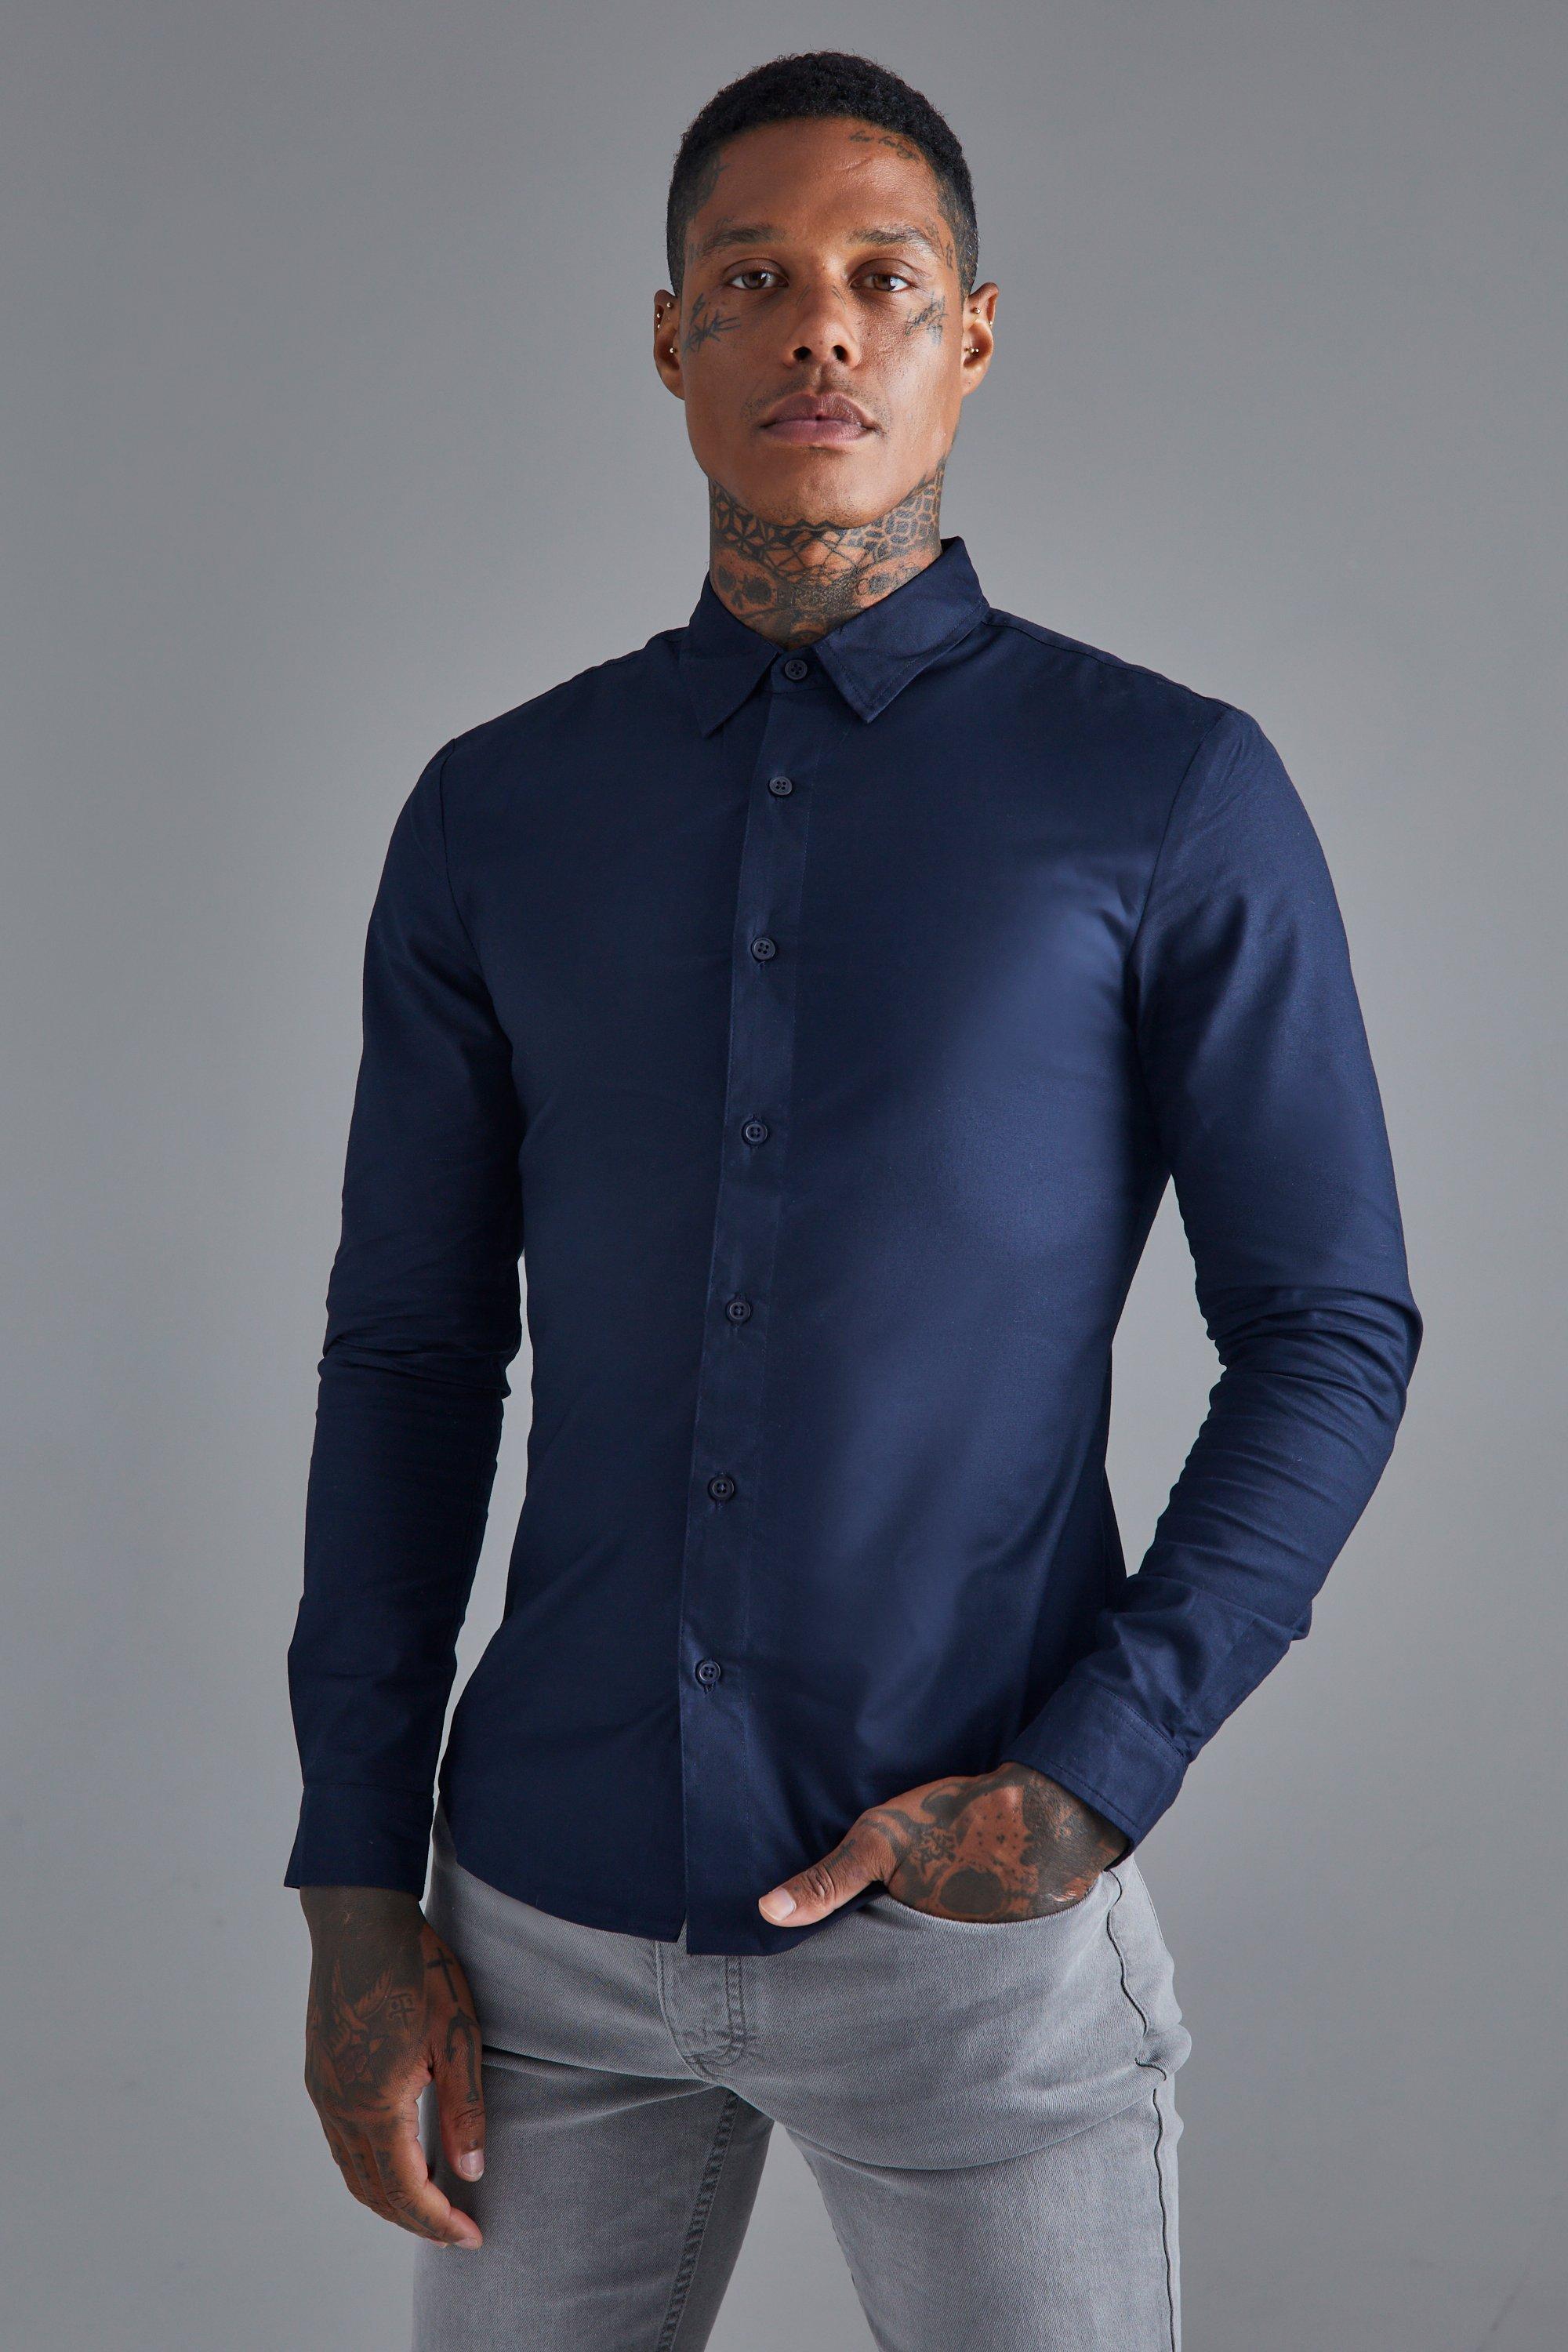 Mens Navy Long Sleeve Muscle Fit Shirt, Navy